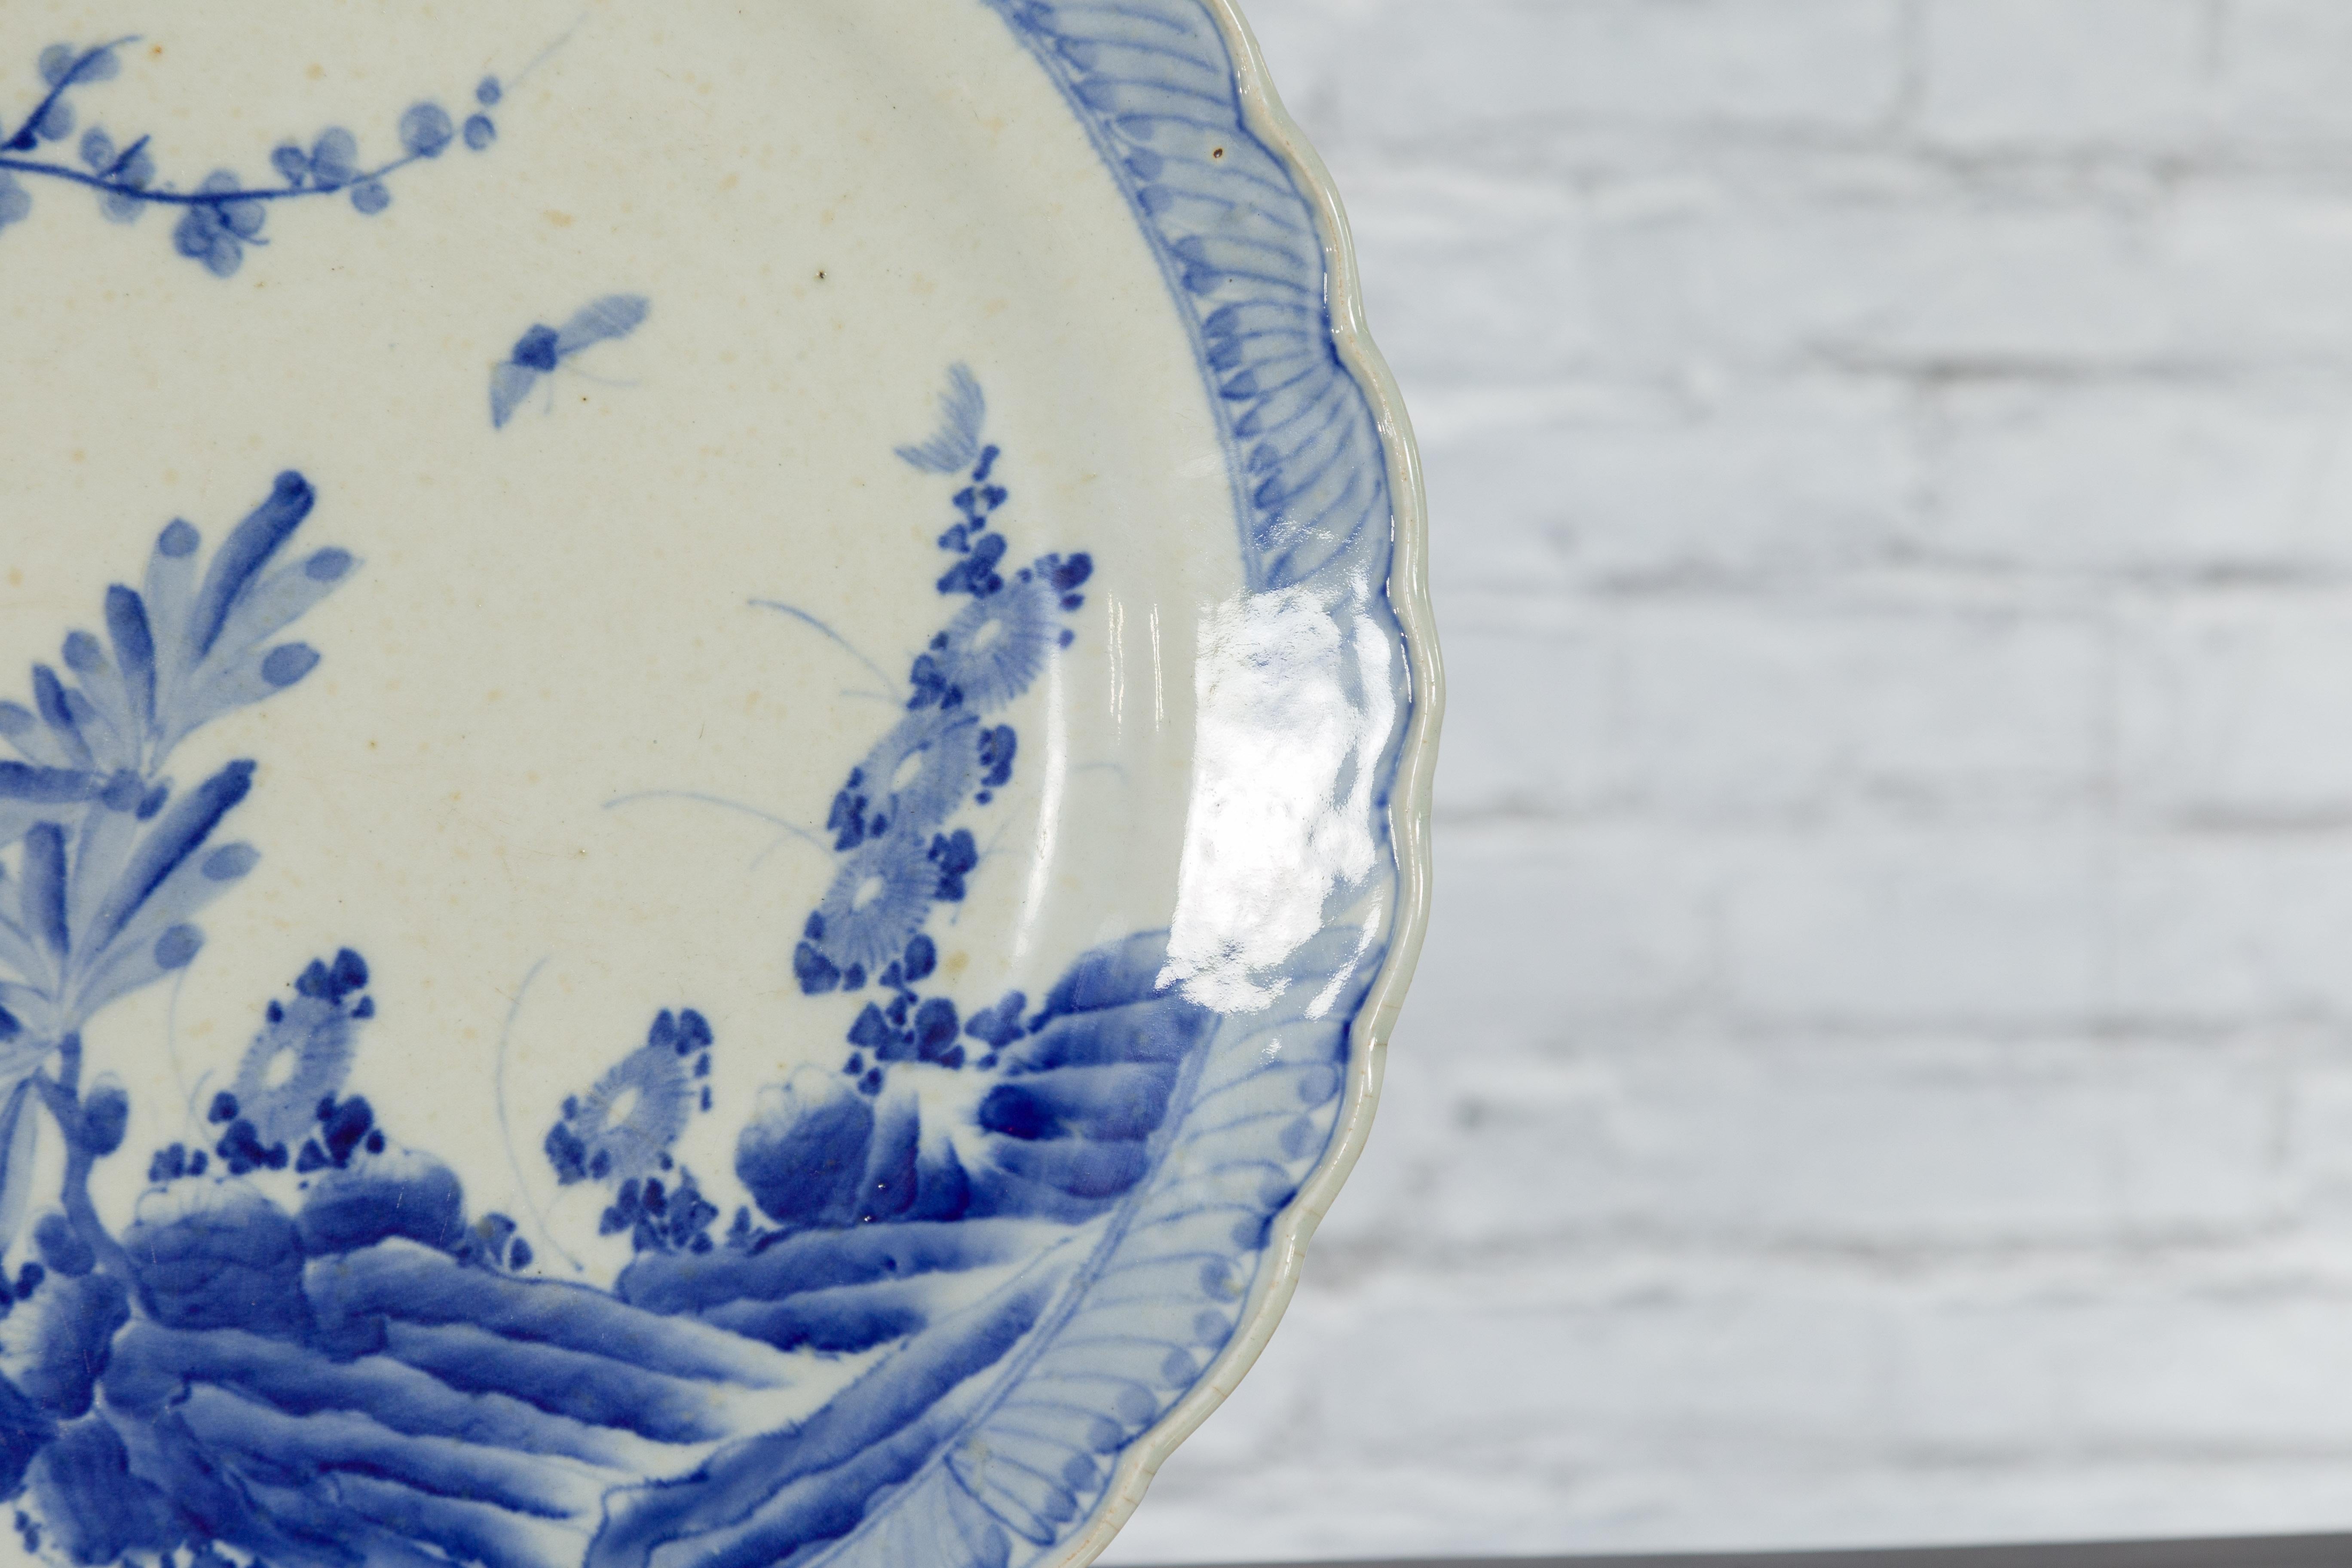 Japanese Blue and White Hand-Painted Porcelain Charger Plate with Foliage Décor For Sale 8